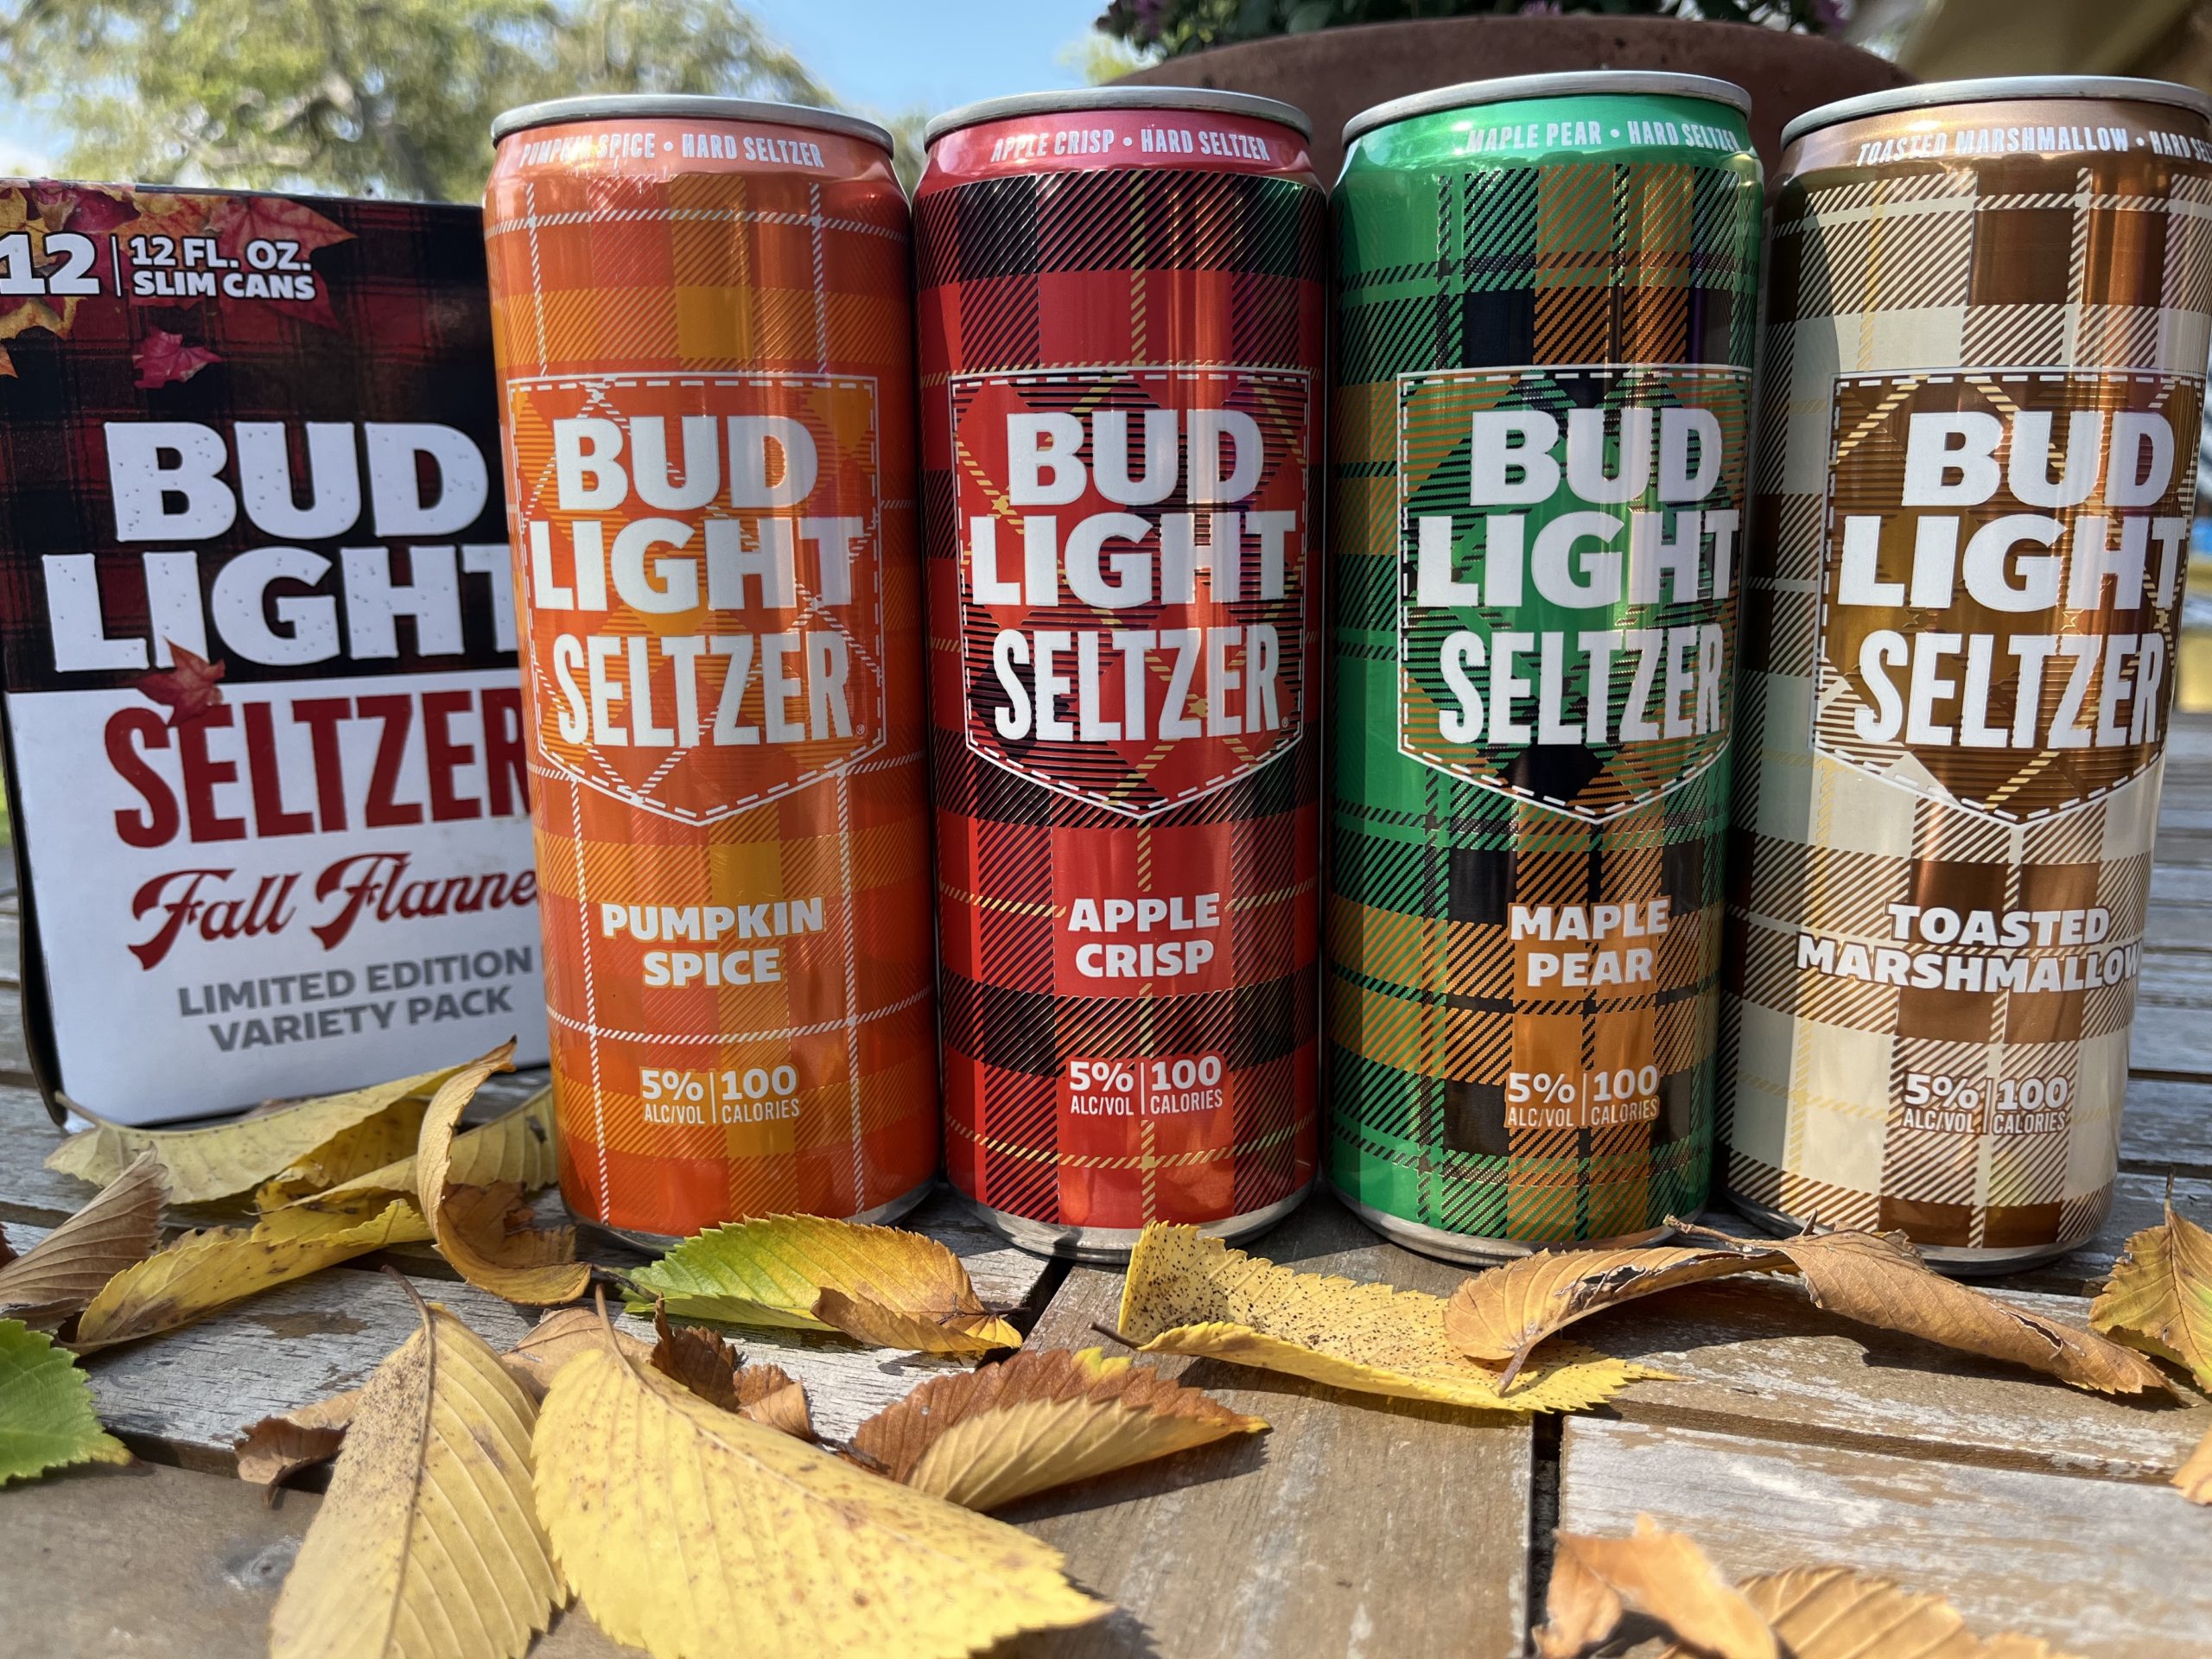 I Tried Bud Light's Pumpkin Spice Seltzer So You Don't Have To